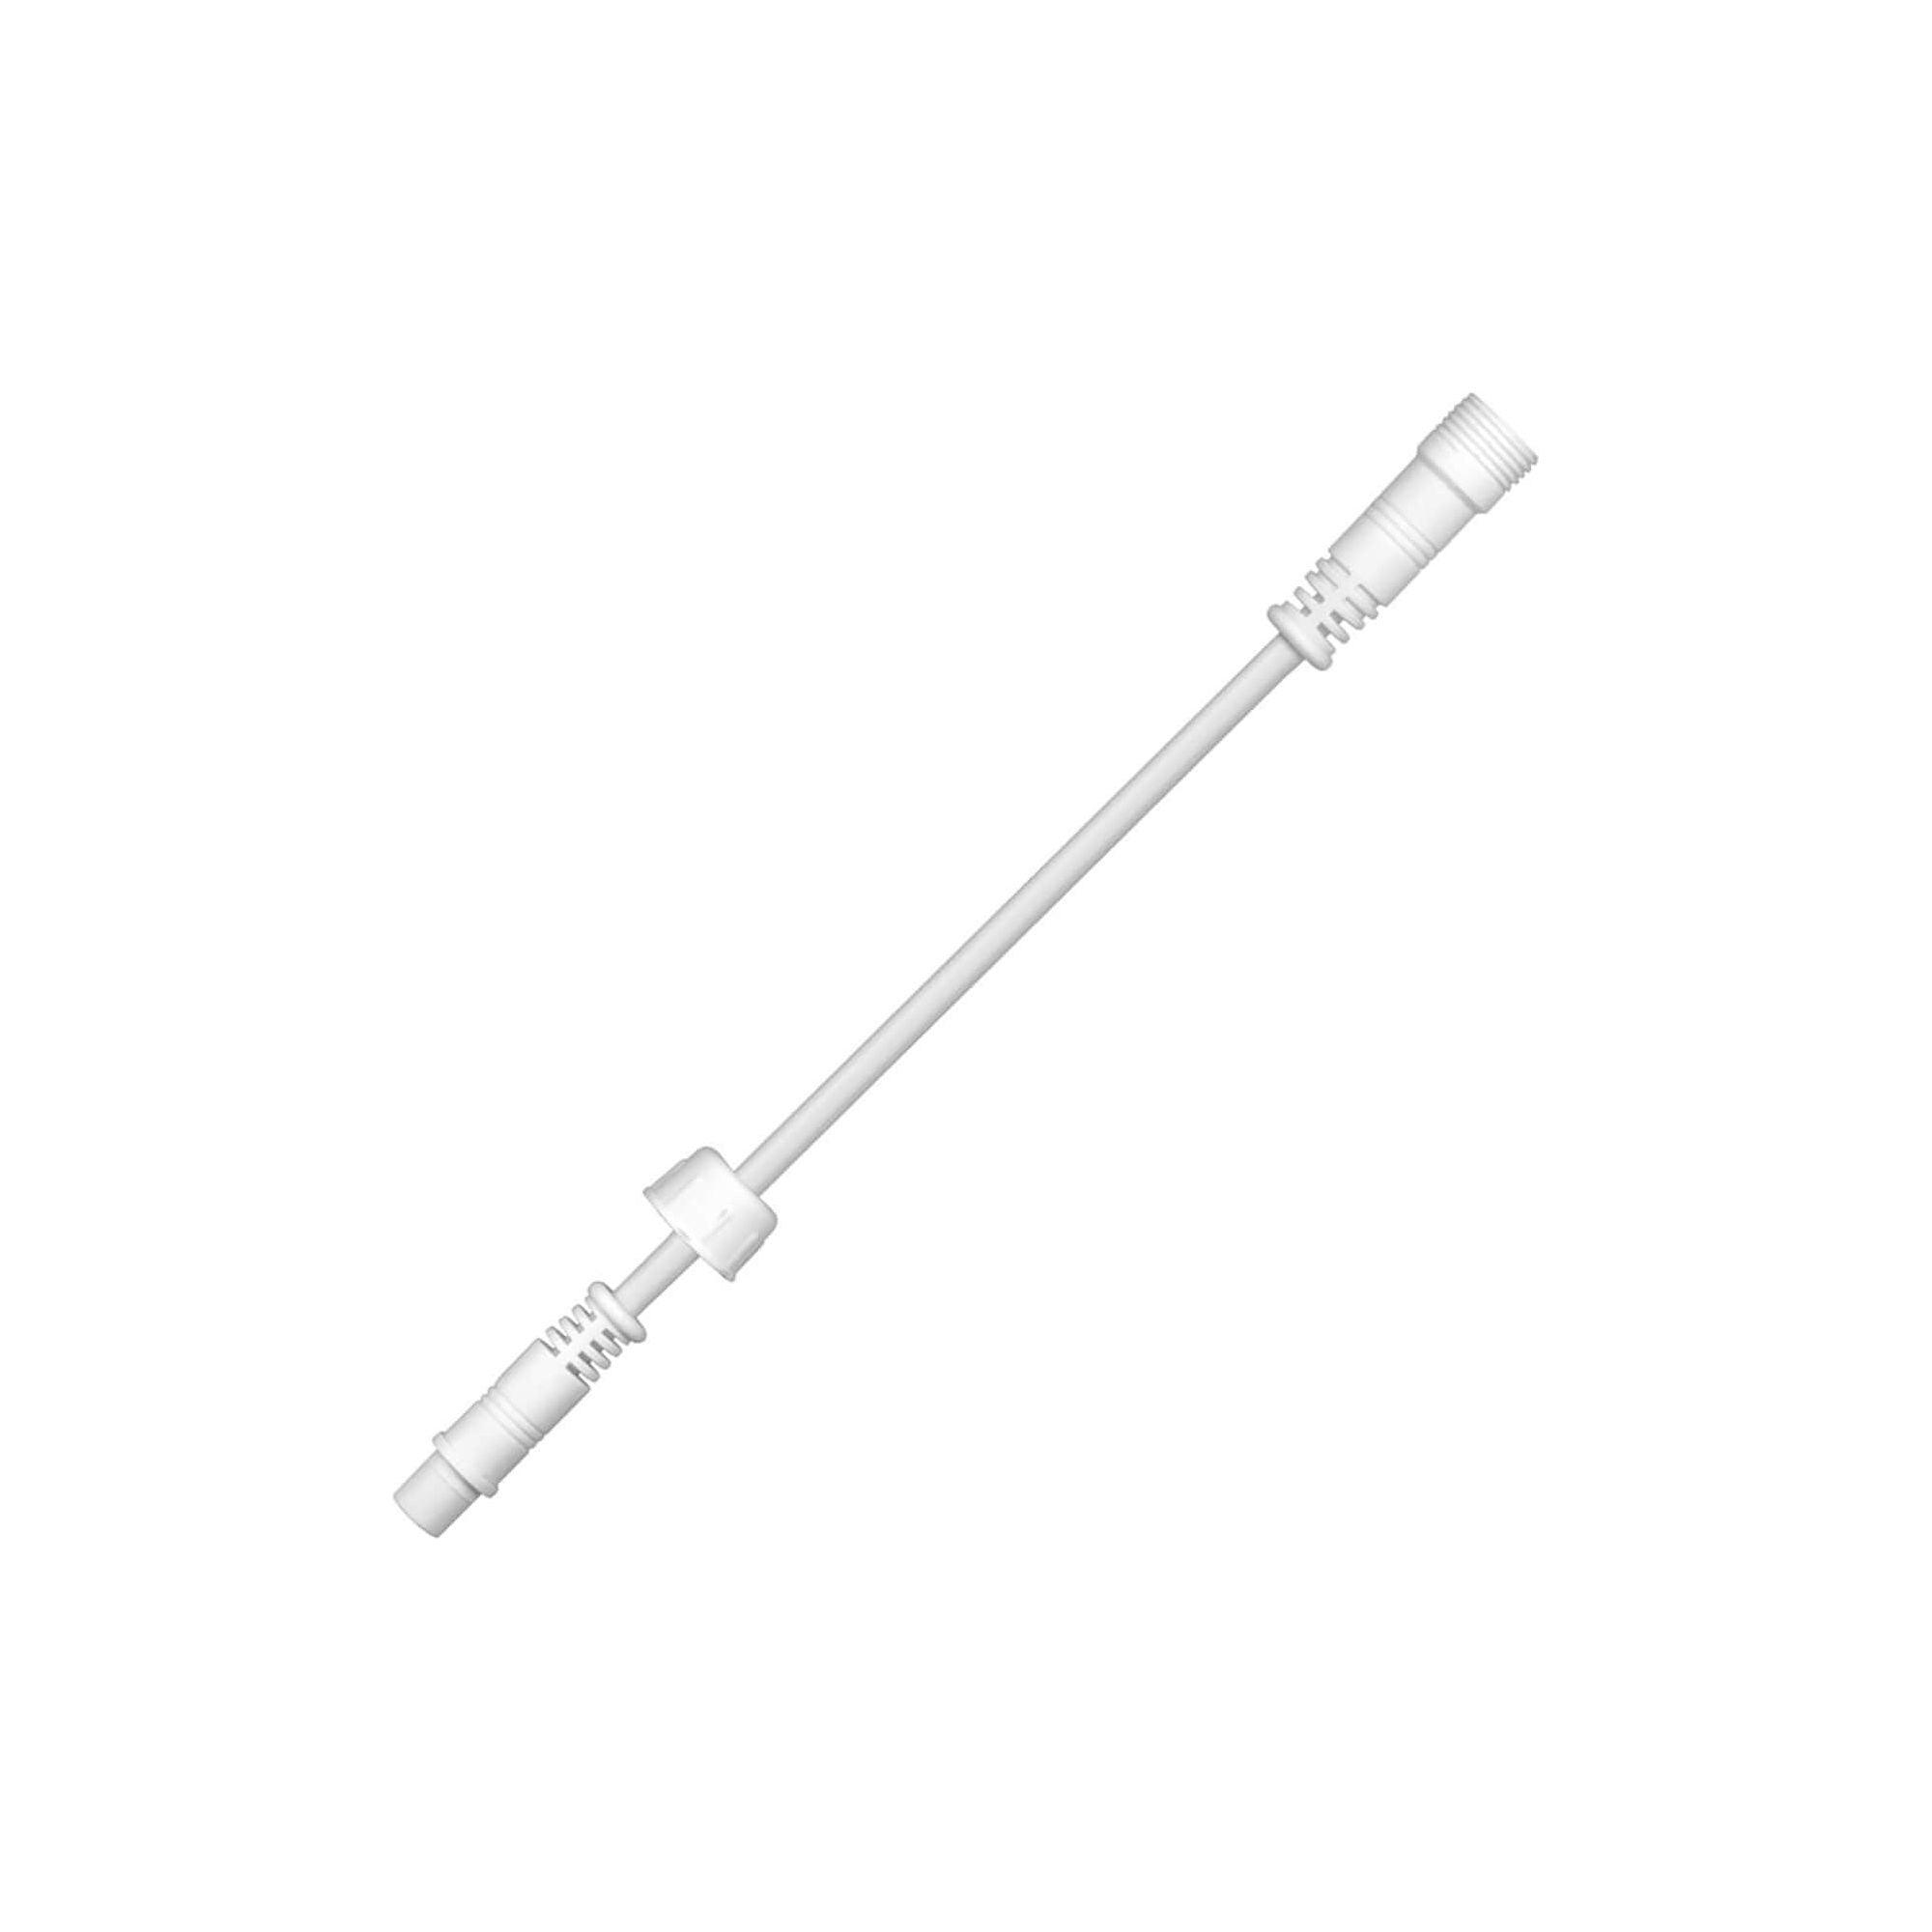 DALS - DALS Connect 108'' extension for SMART regressed lights - Lights Canada